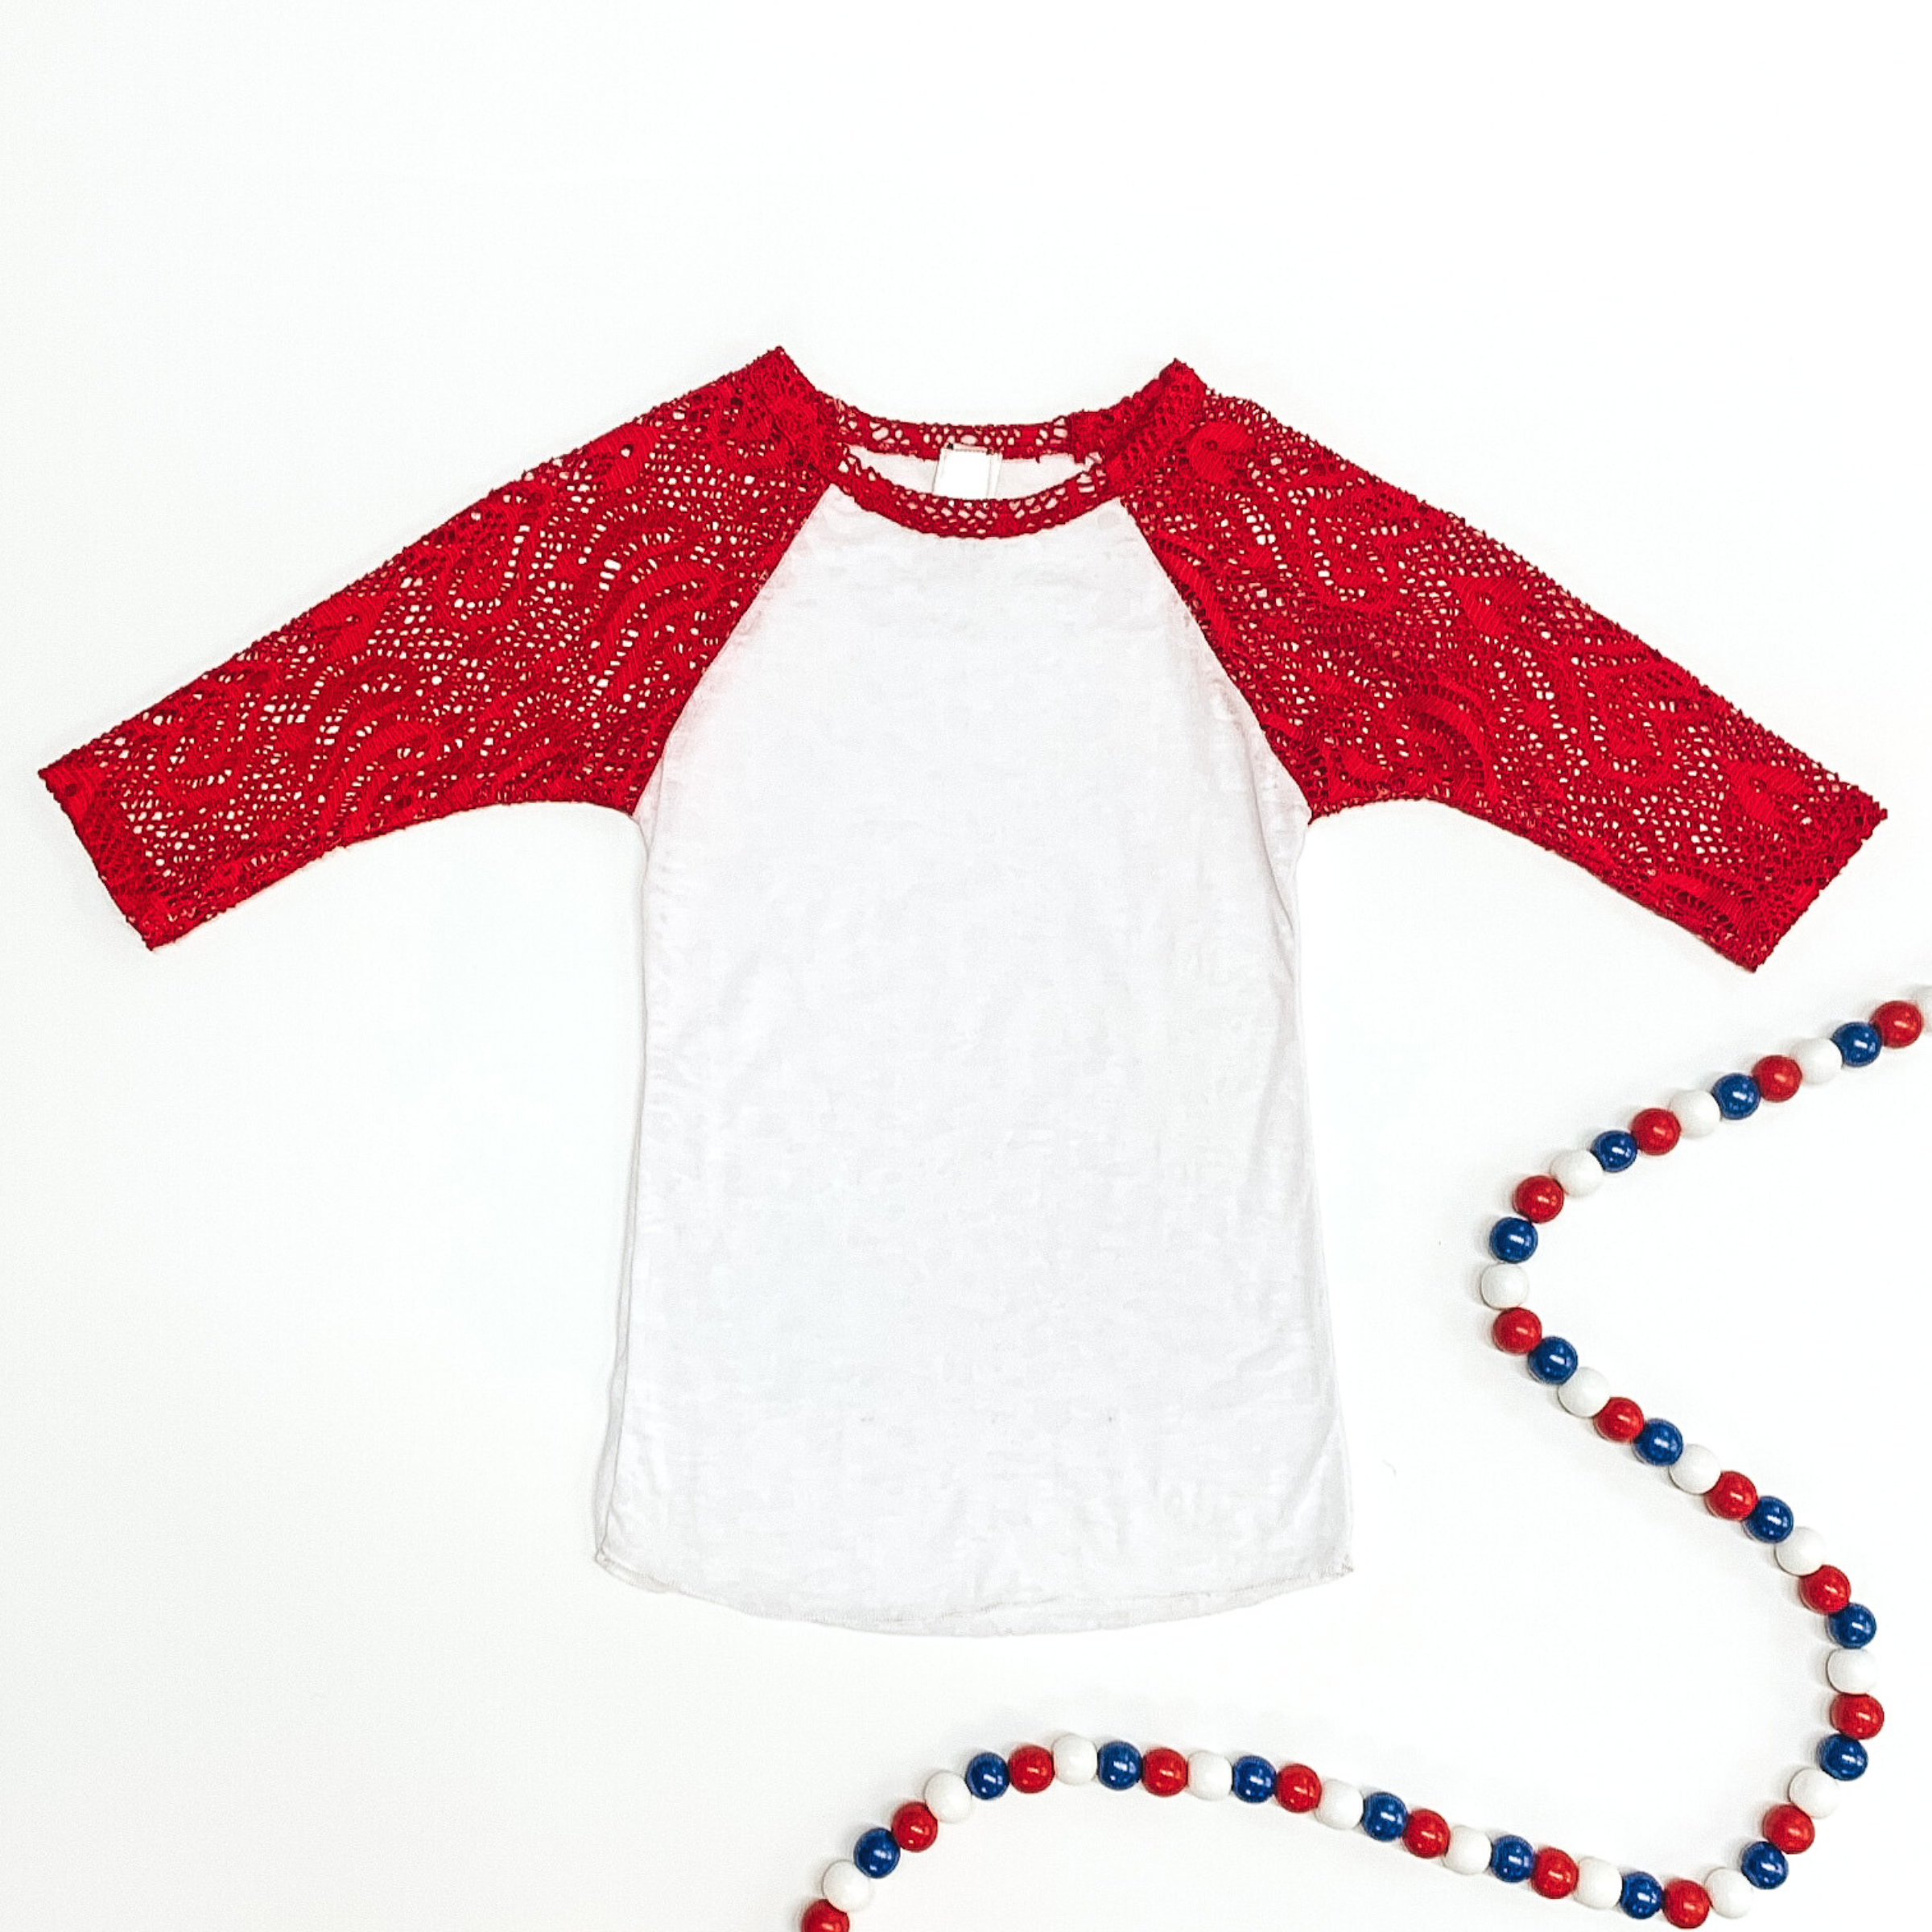 Children's Crochet with Love White Burnout Baseball Tee with Red Crochet Sleeves - Giddy Up Glamour Boutique